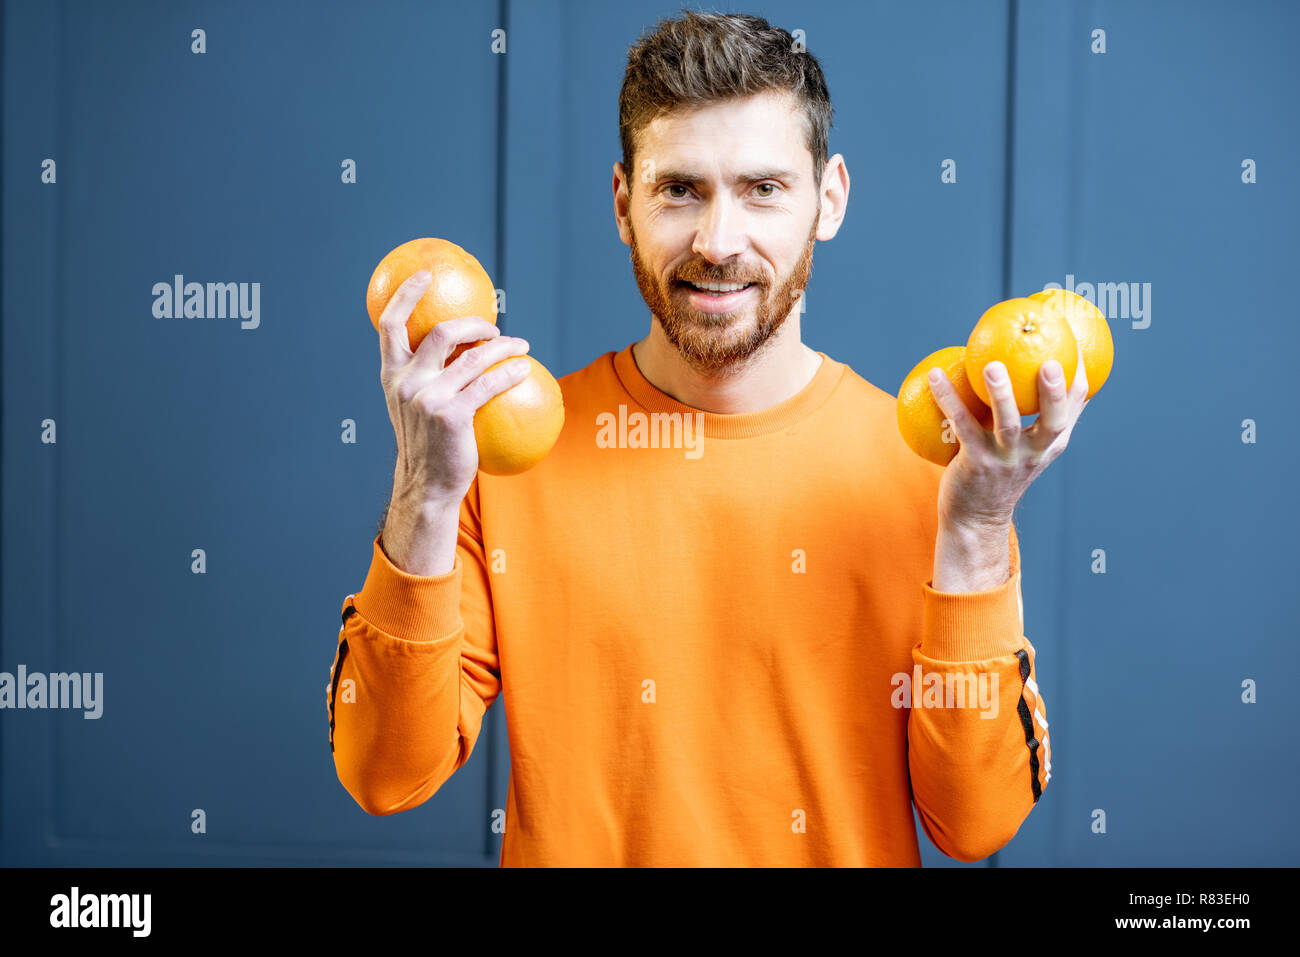 Colorful portrait of a caucasian bearded man in orange sweater holding fruits on the blue background Stock Photo